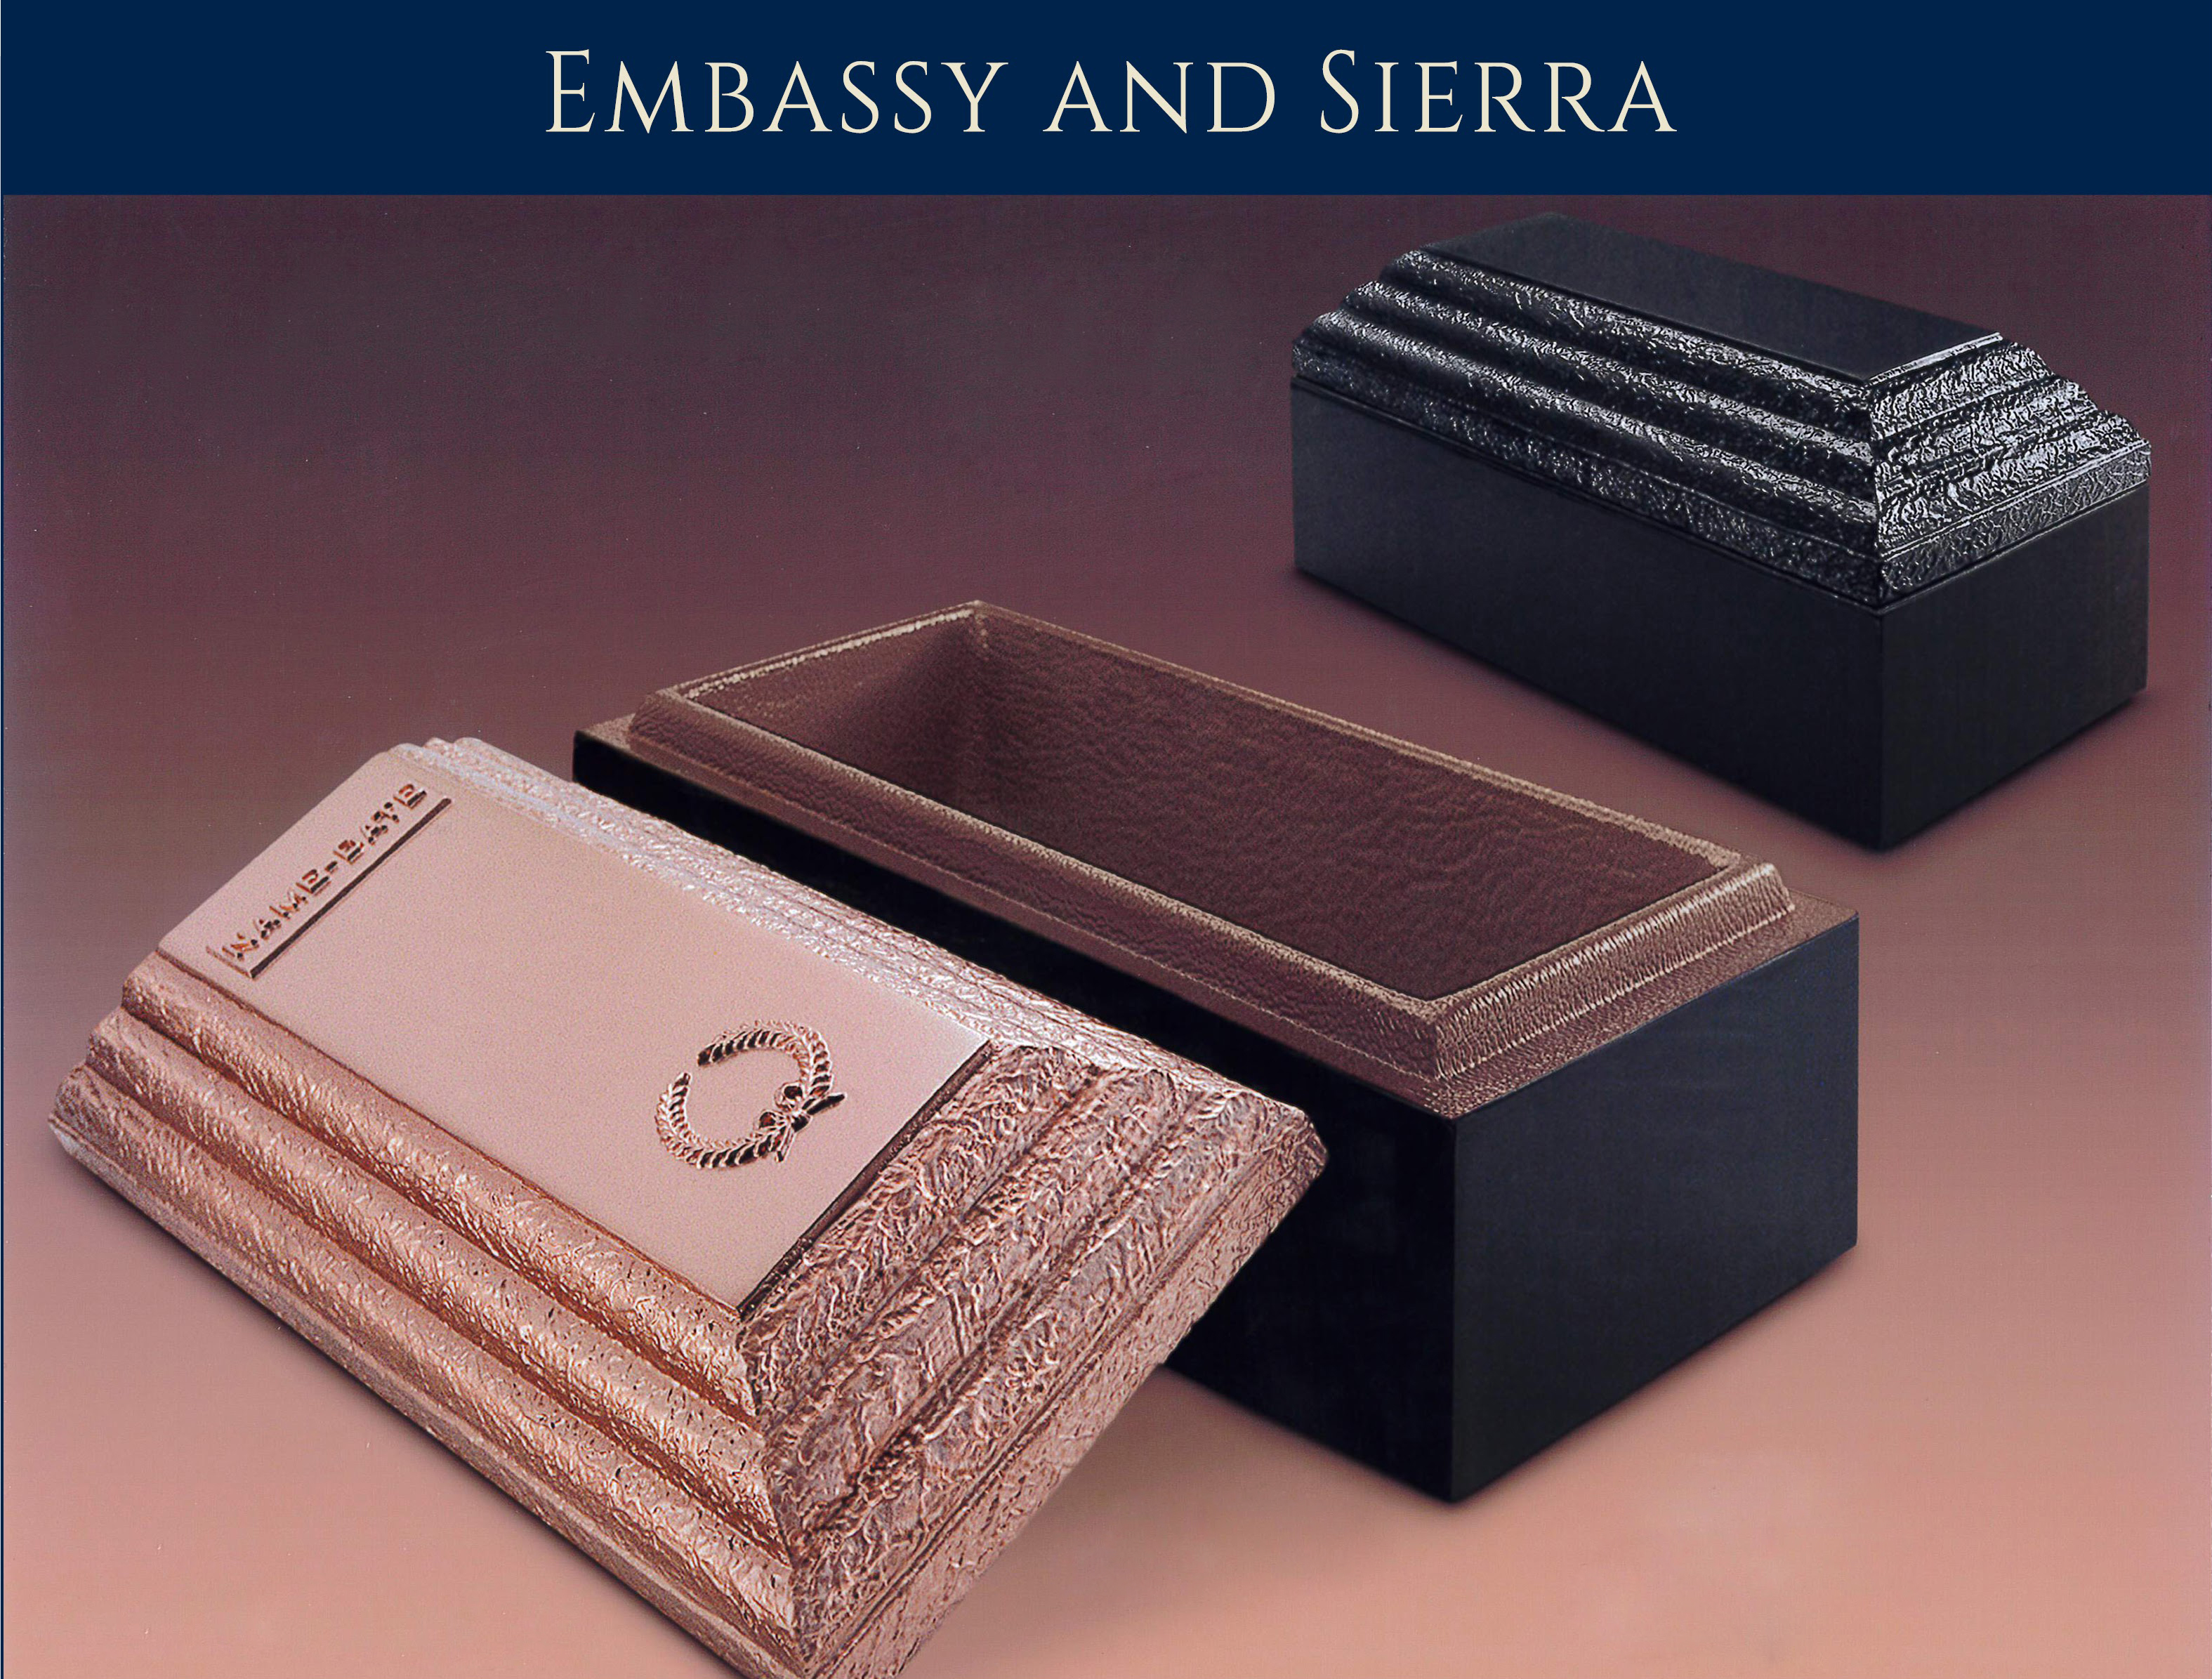 Embassy and Sierra